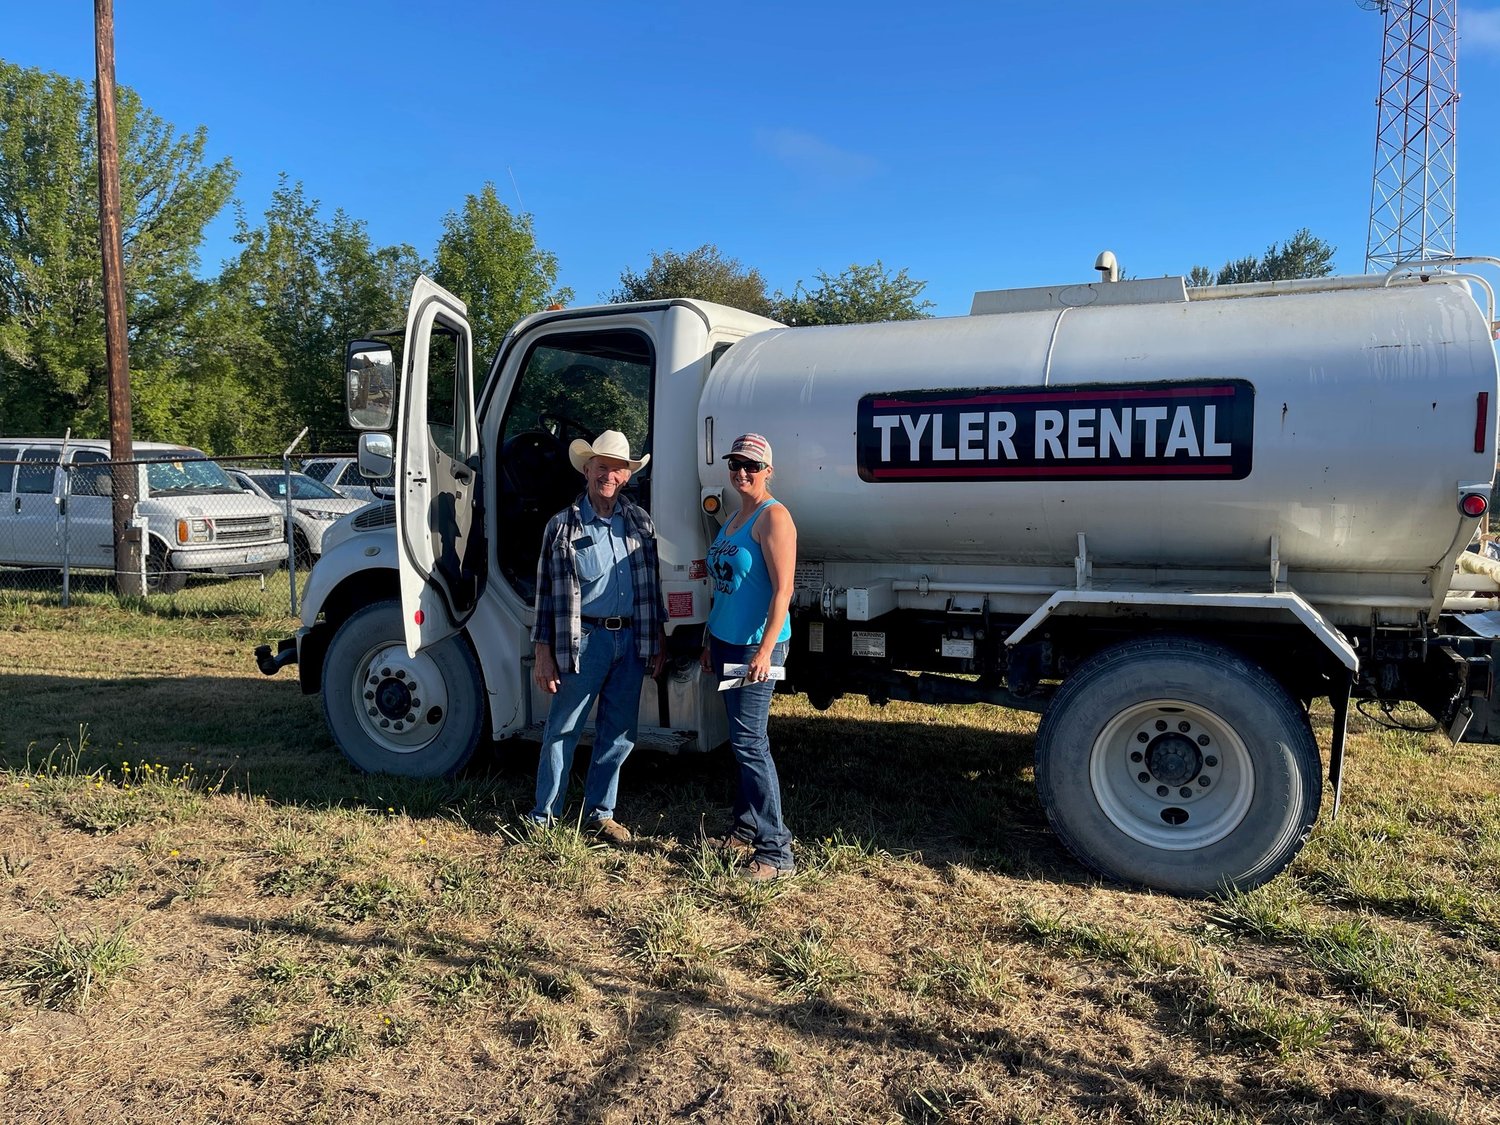 Pictured with the Tyler Rental water tender are Adam Kasper, a longtime Southwest Washington Fair Horse Department volunteer, and Horse Department Superintendent Anne Hamilton.